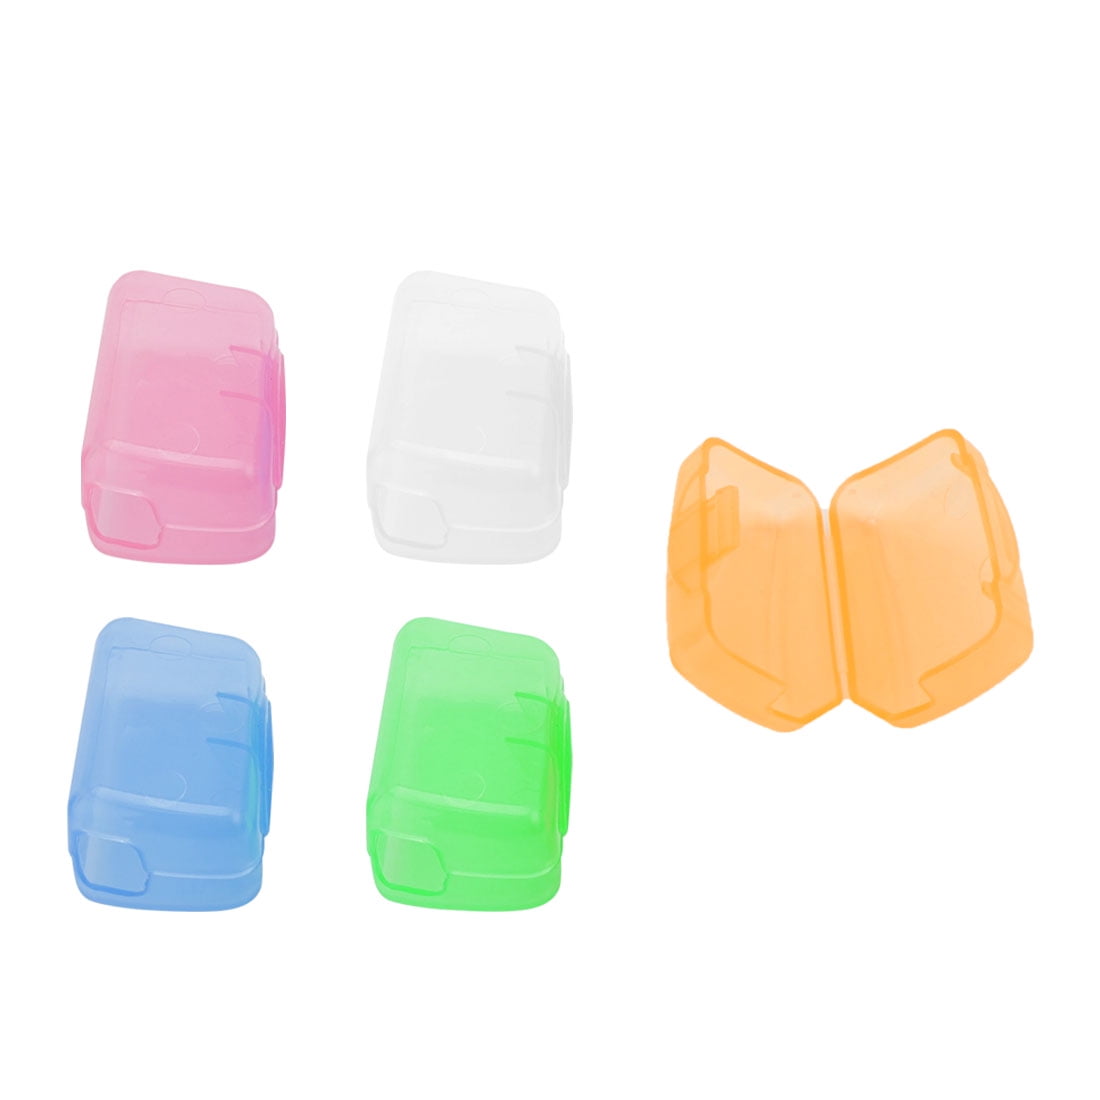 Travel Camping Toothbrush Head Holder Protect Brush Cap Clean Box Case Cover 5X 